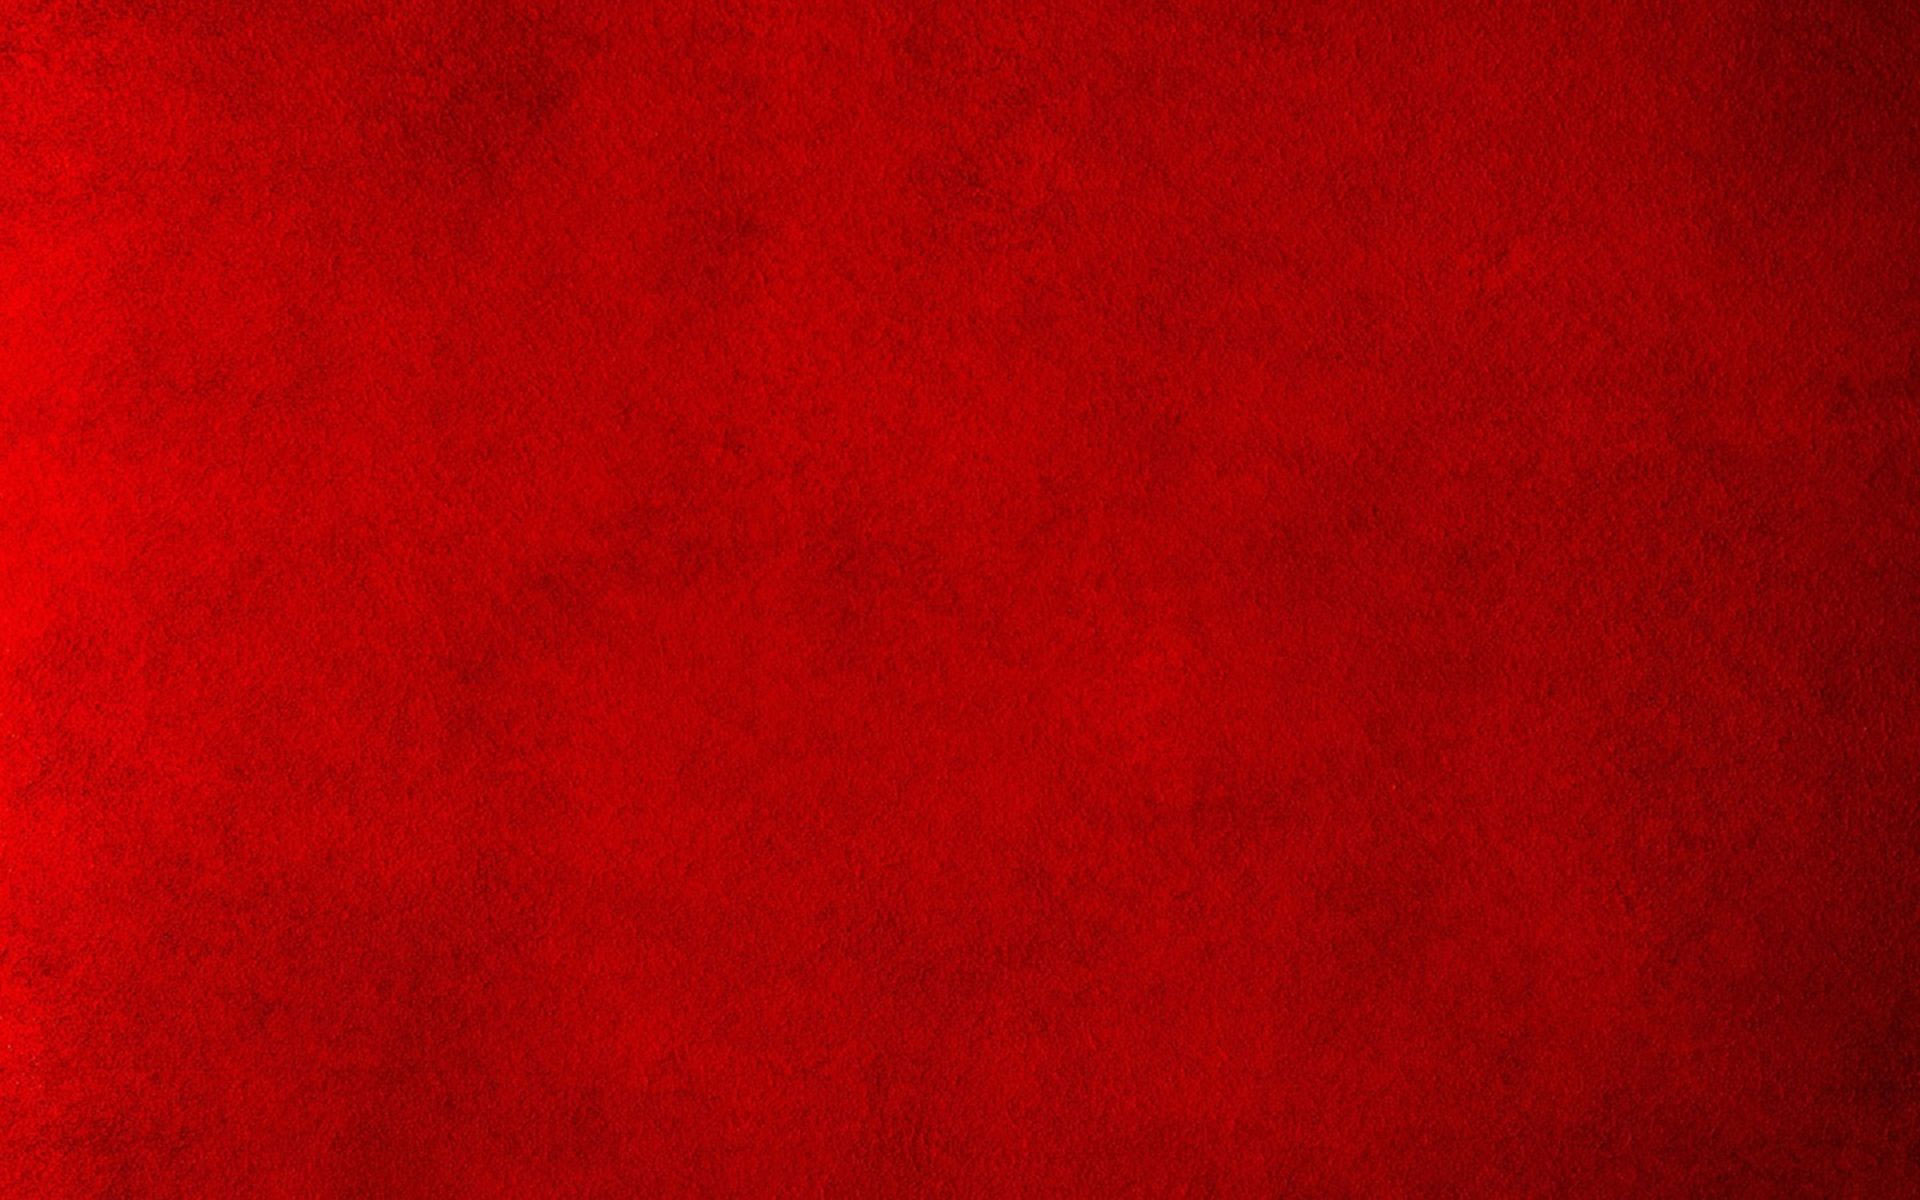 🔥 Download Hd Red Wallpaper By Jgray8 Backgrounds Red Red